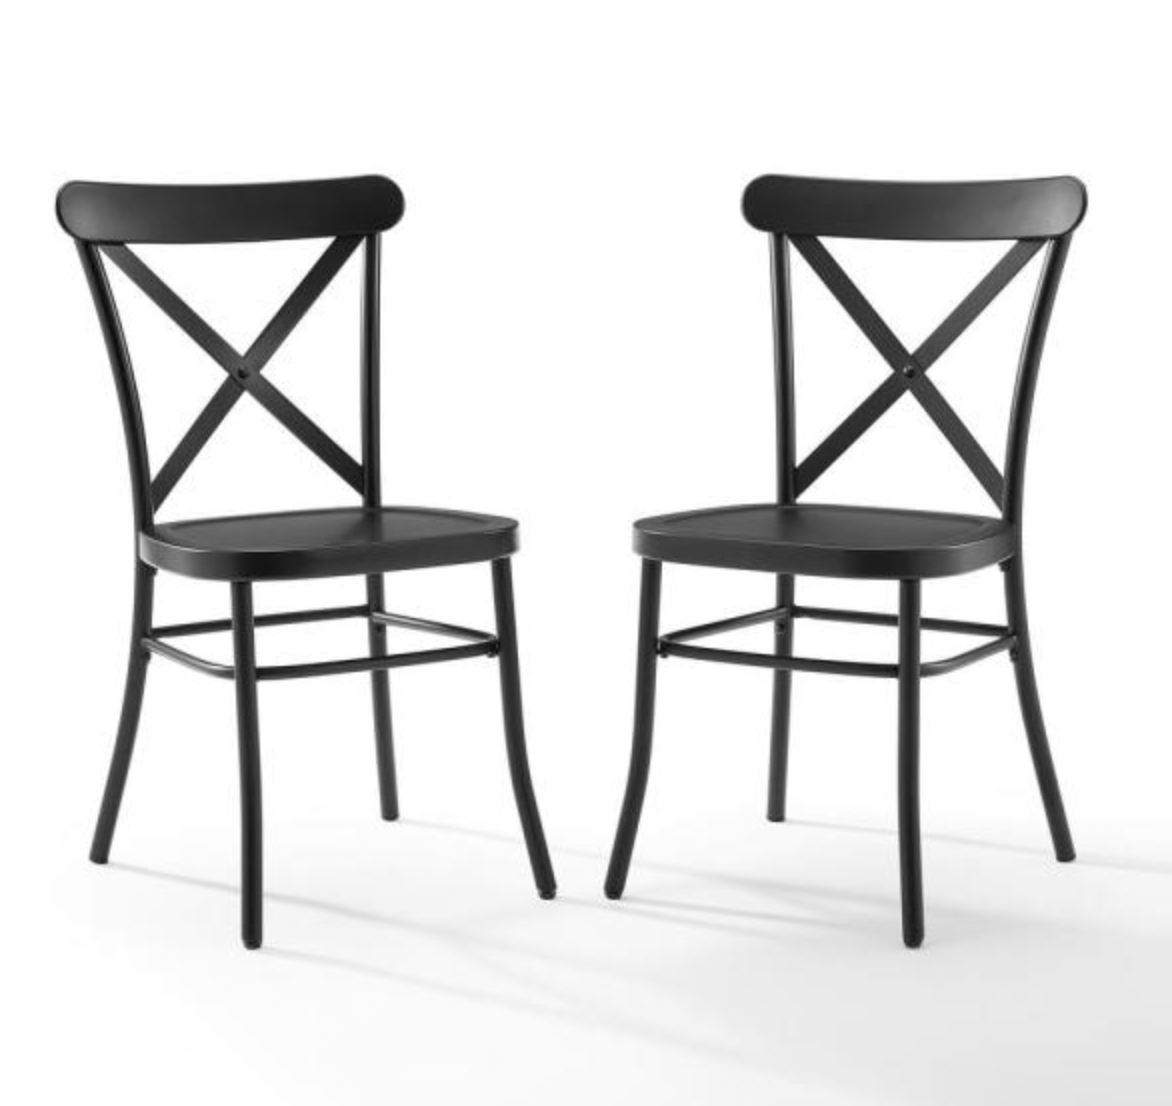 Camille Black Metal X Back Chair - ironbyironwoodworks.com